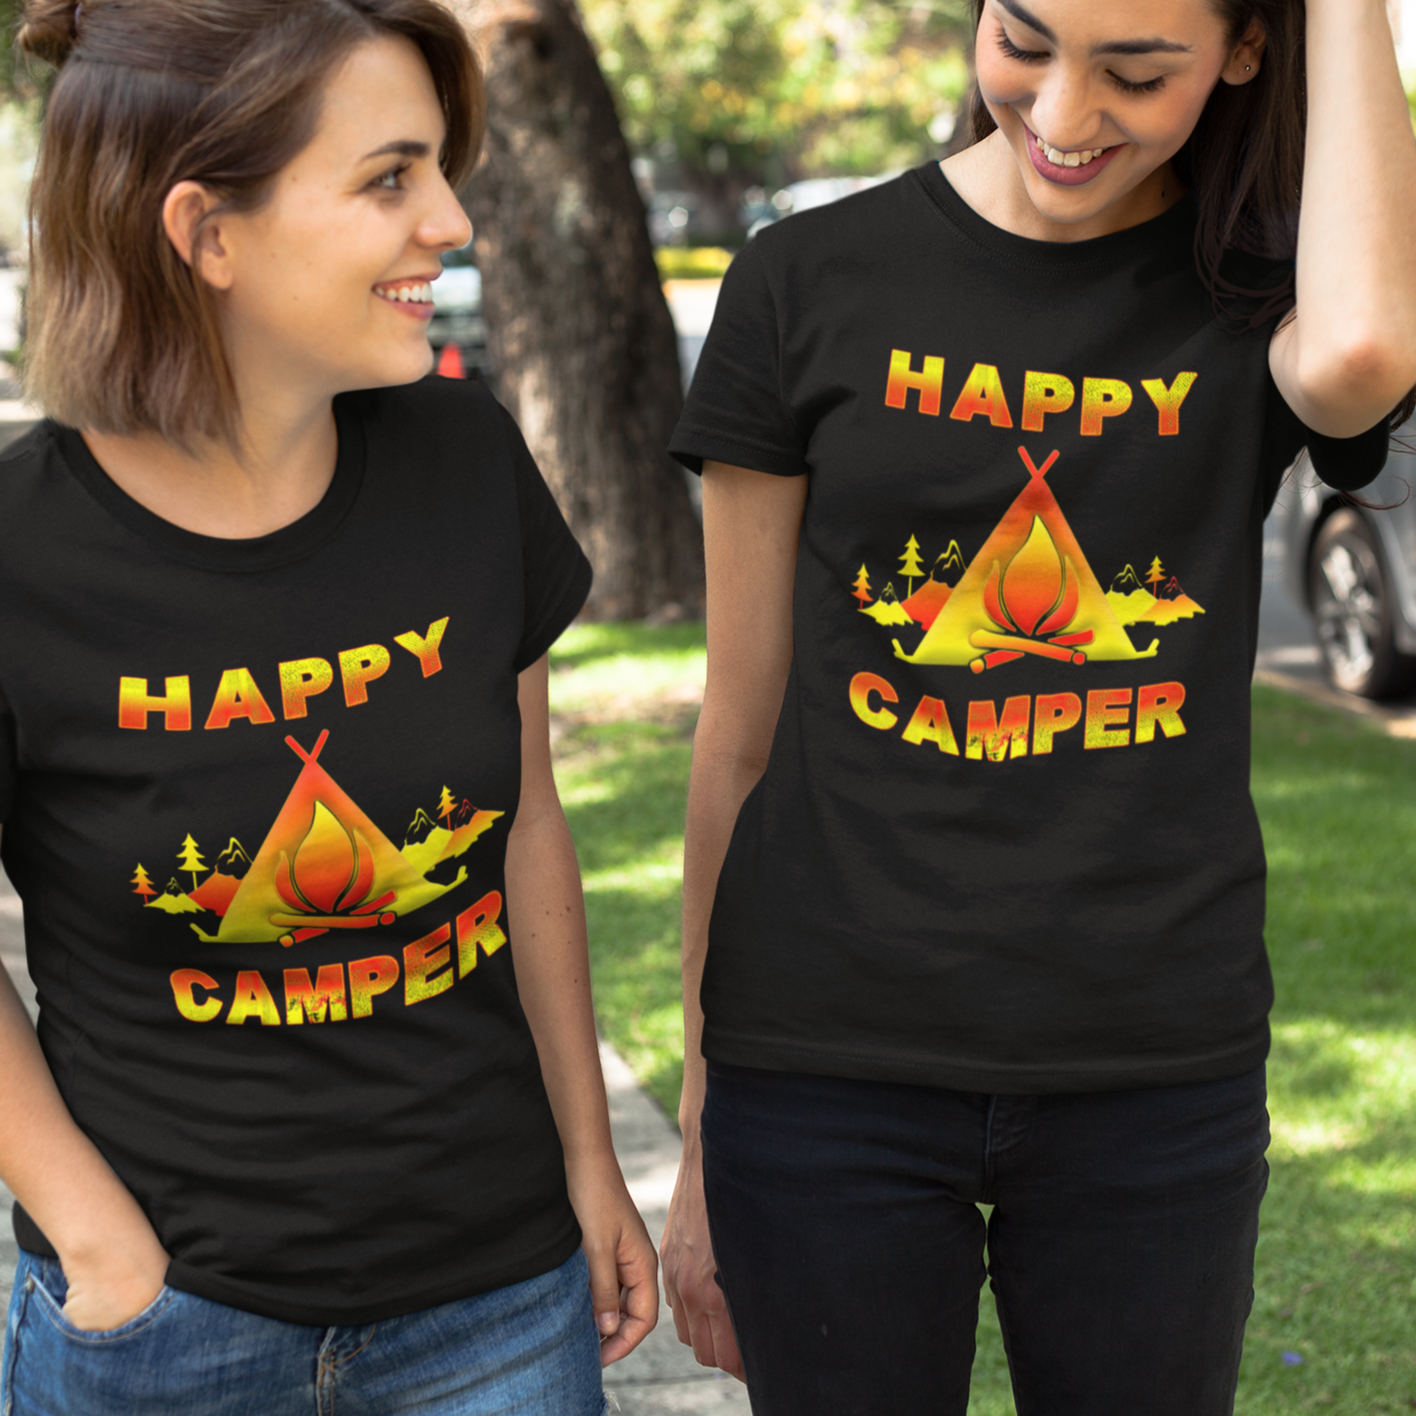 Camping Shirt for Girls - Camping Clothes for Girls - Happy Camper Camping Shirts for Kids Funny - image 5 of 9